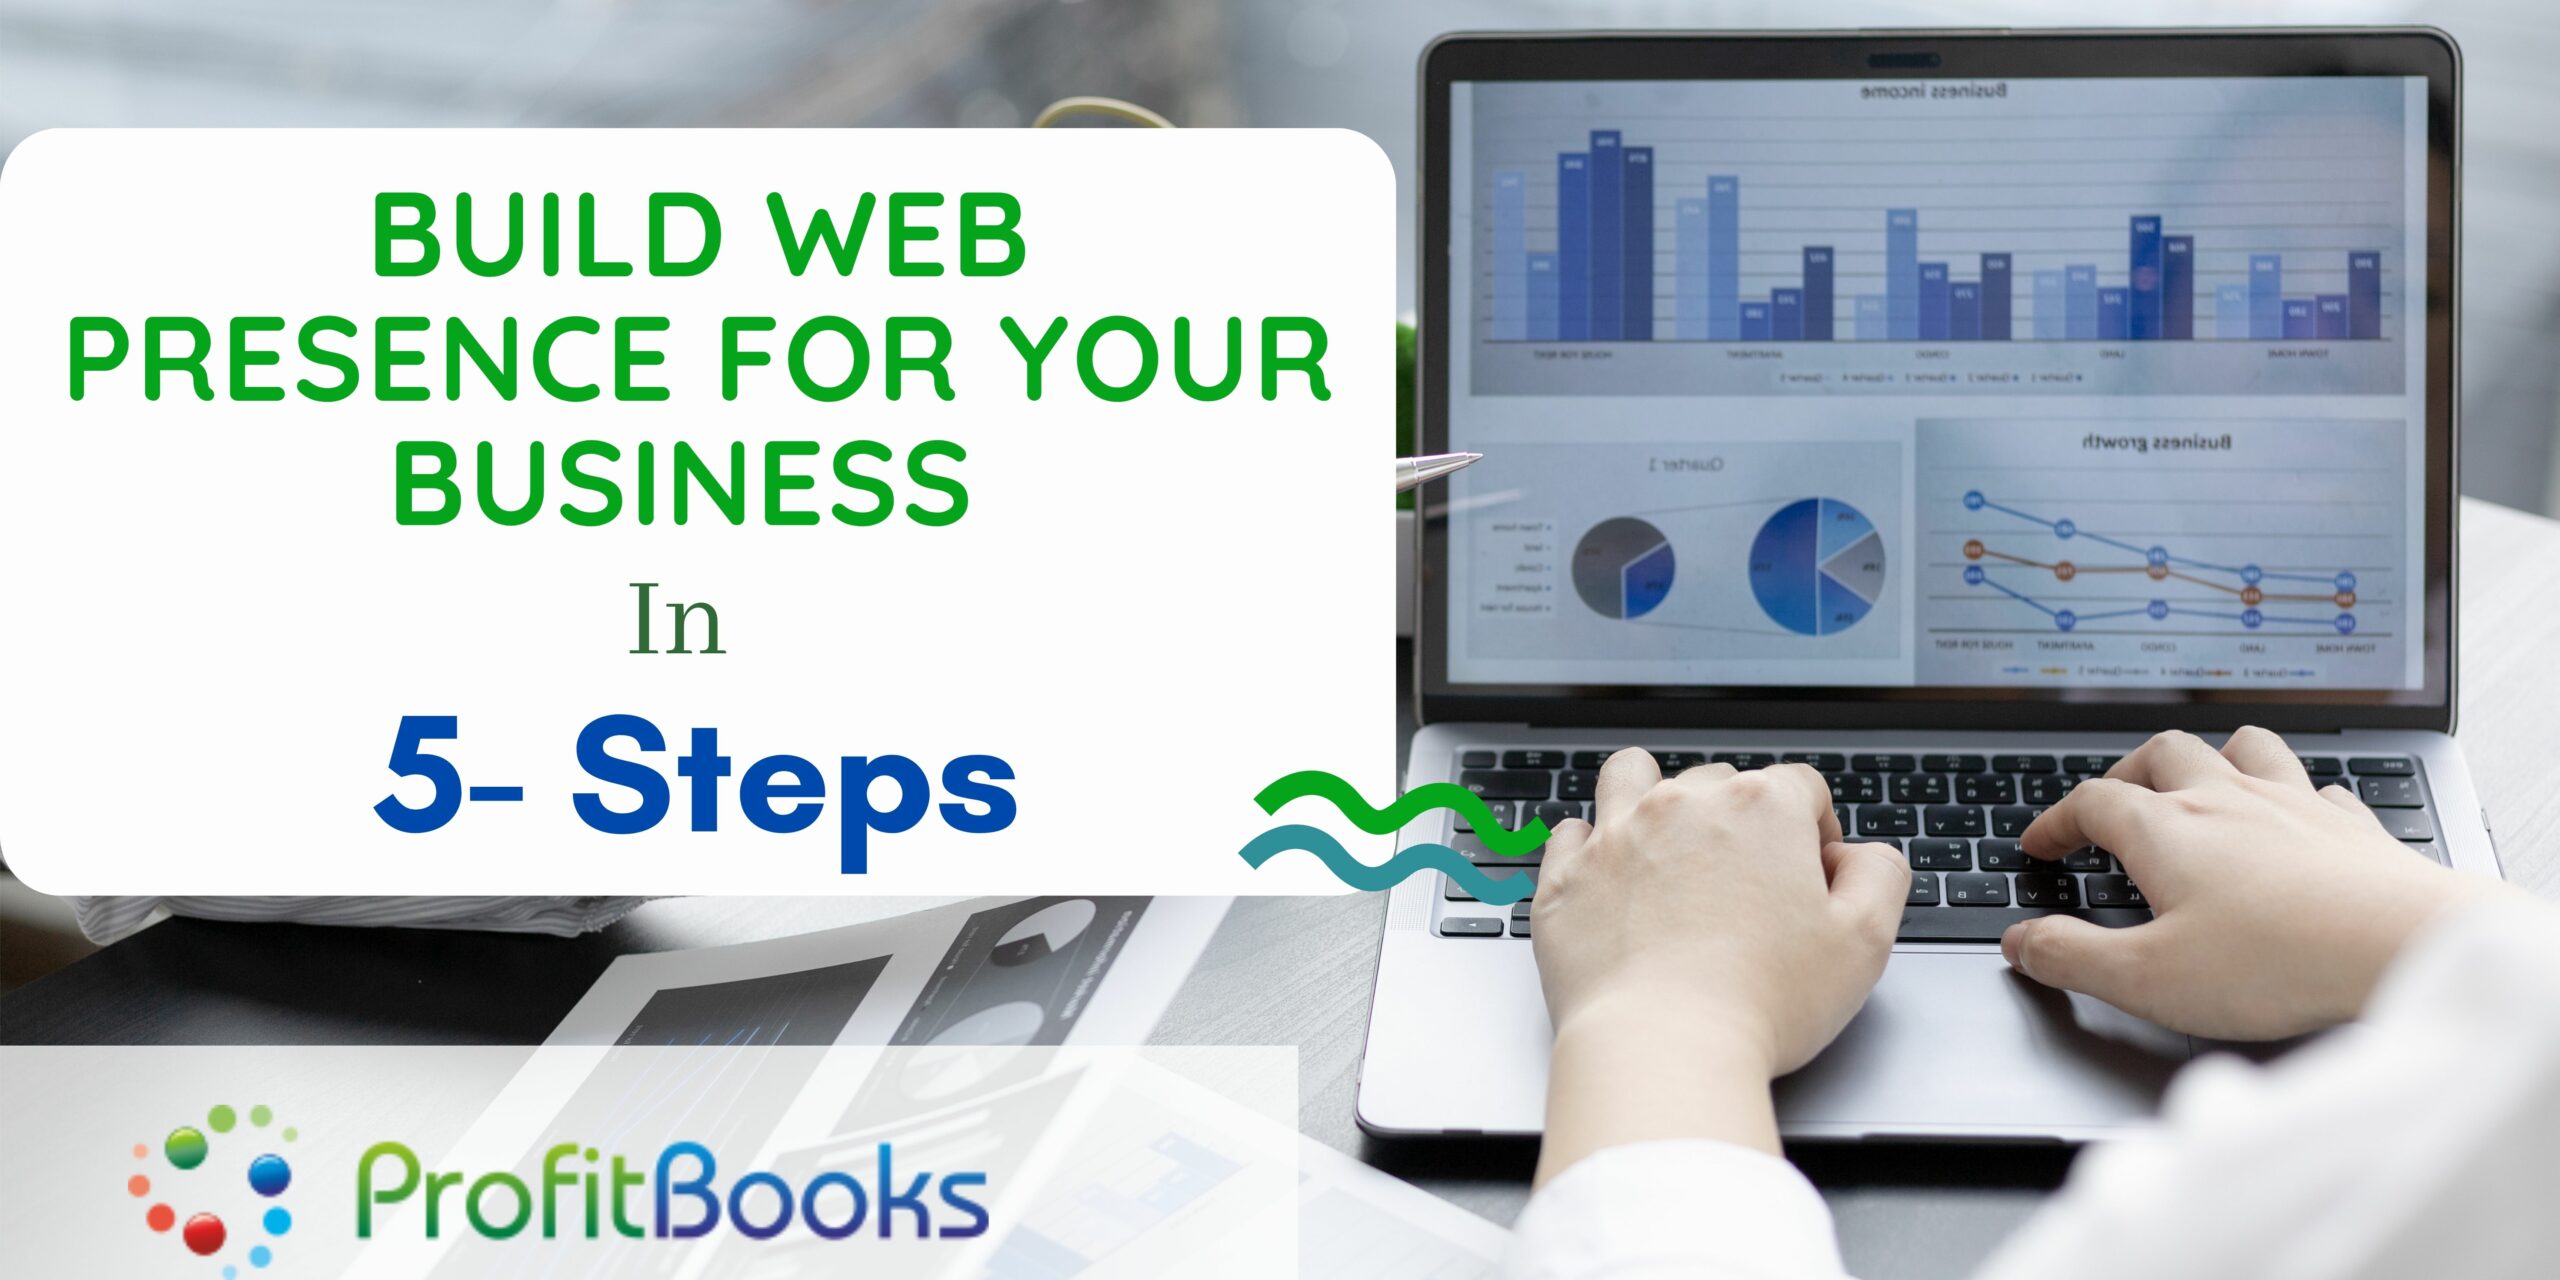 How to build a web presence for your business